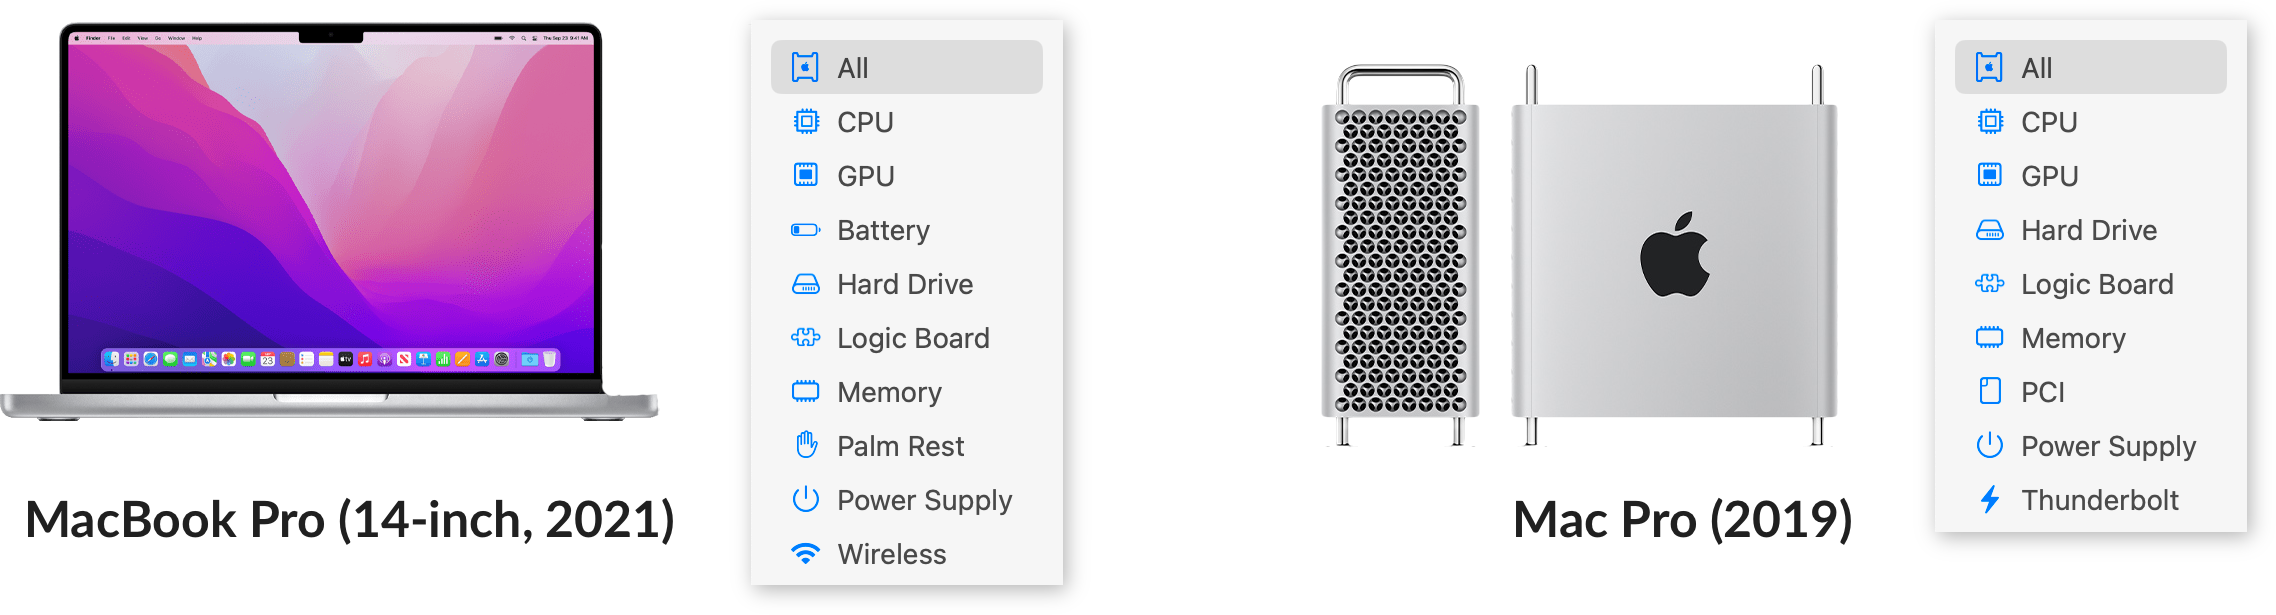 Screenshot displaying the different types of temperatures available between a MacBook Pro (14-inch, 2021) and a Mac Pro (2019).